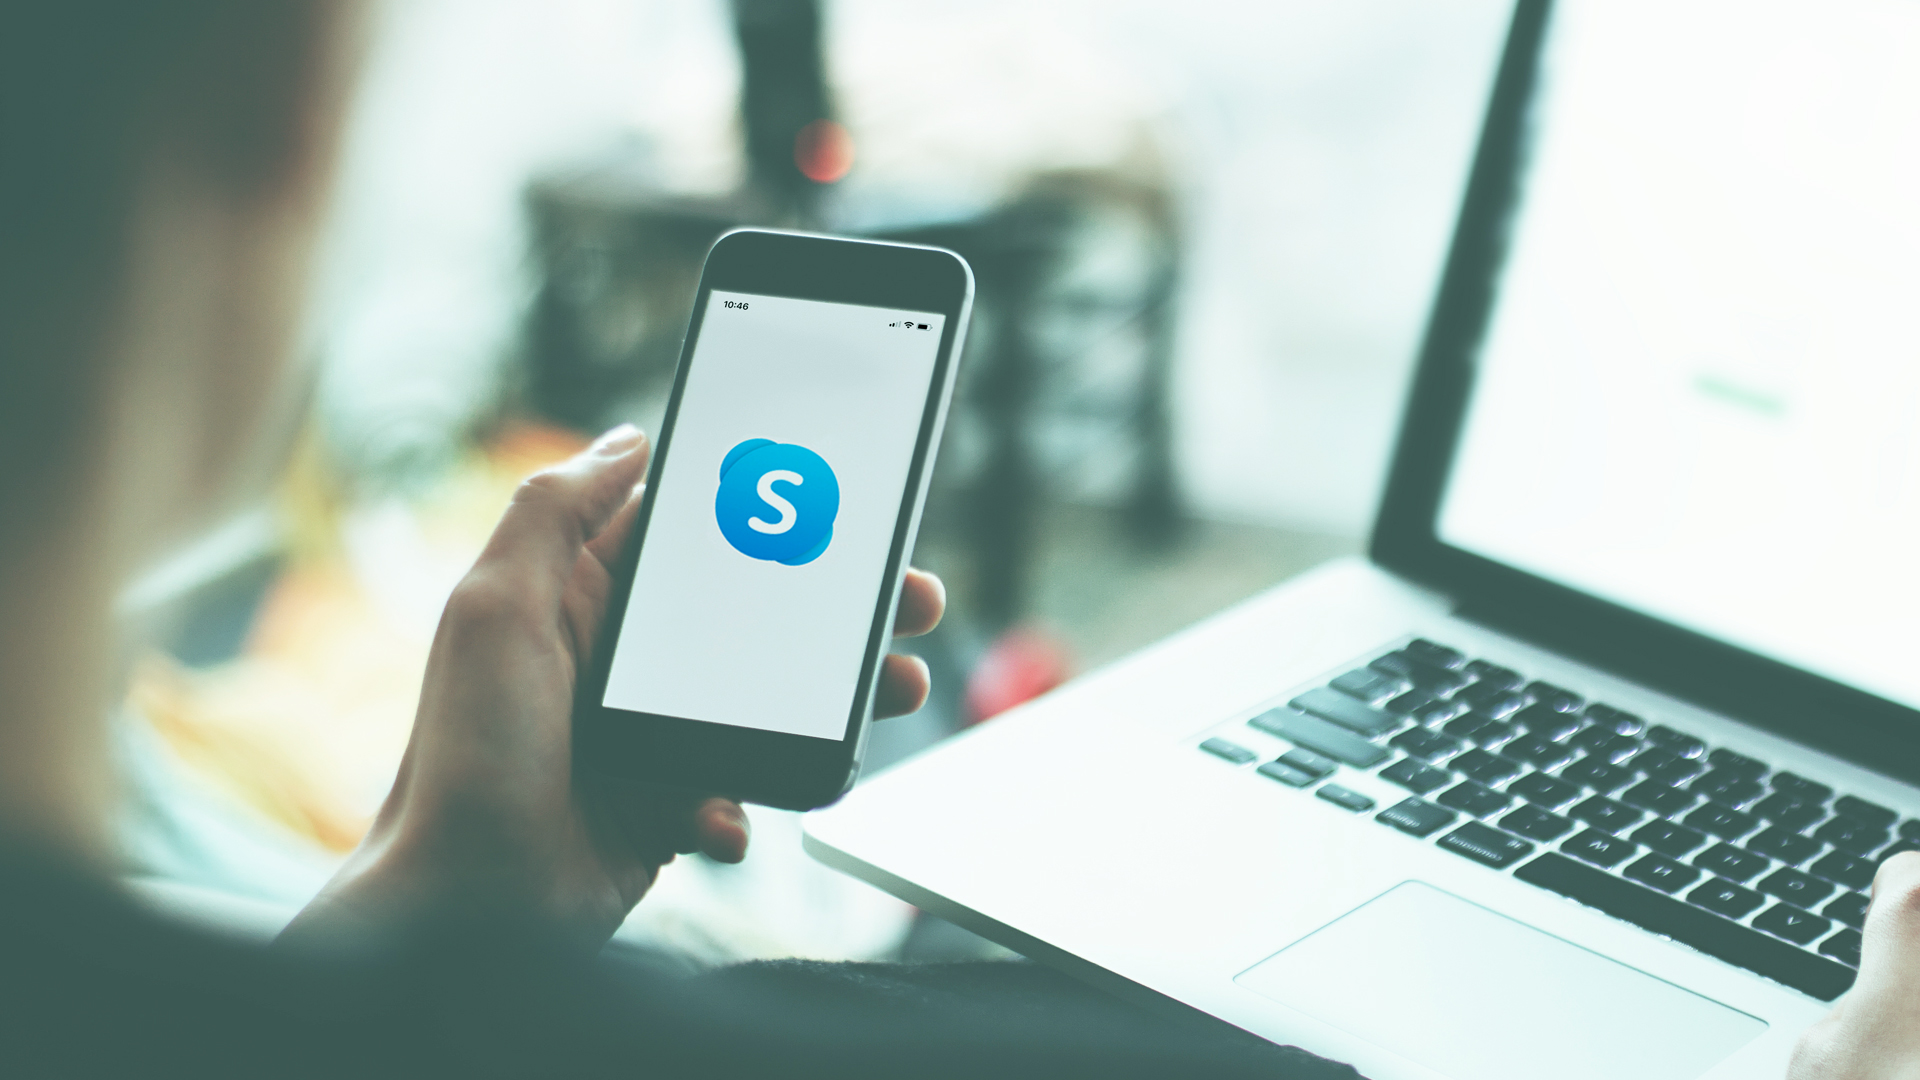 skype for business end of life teams